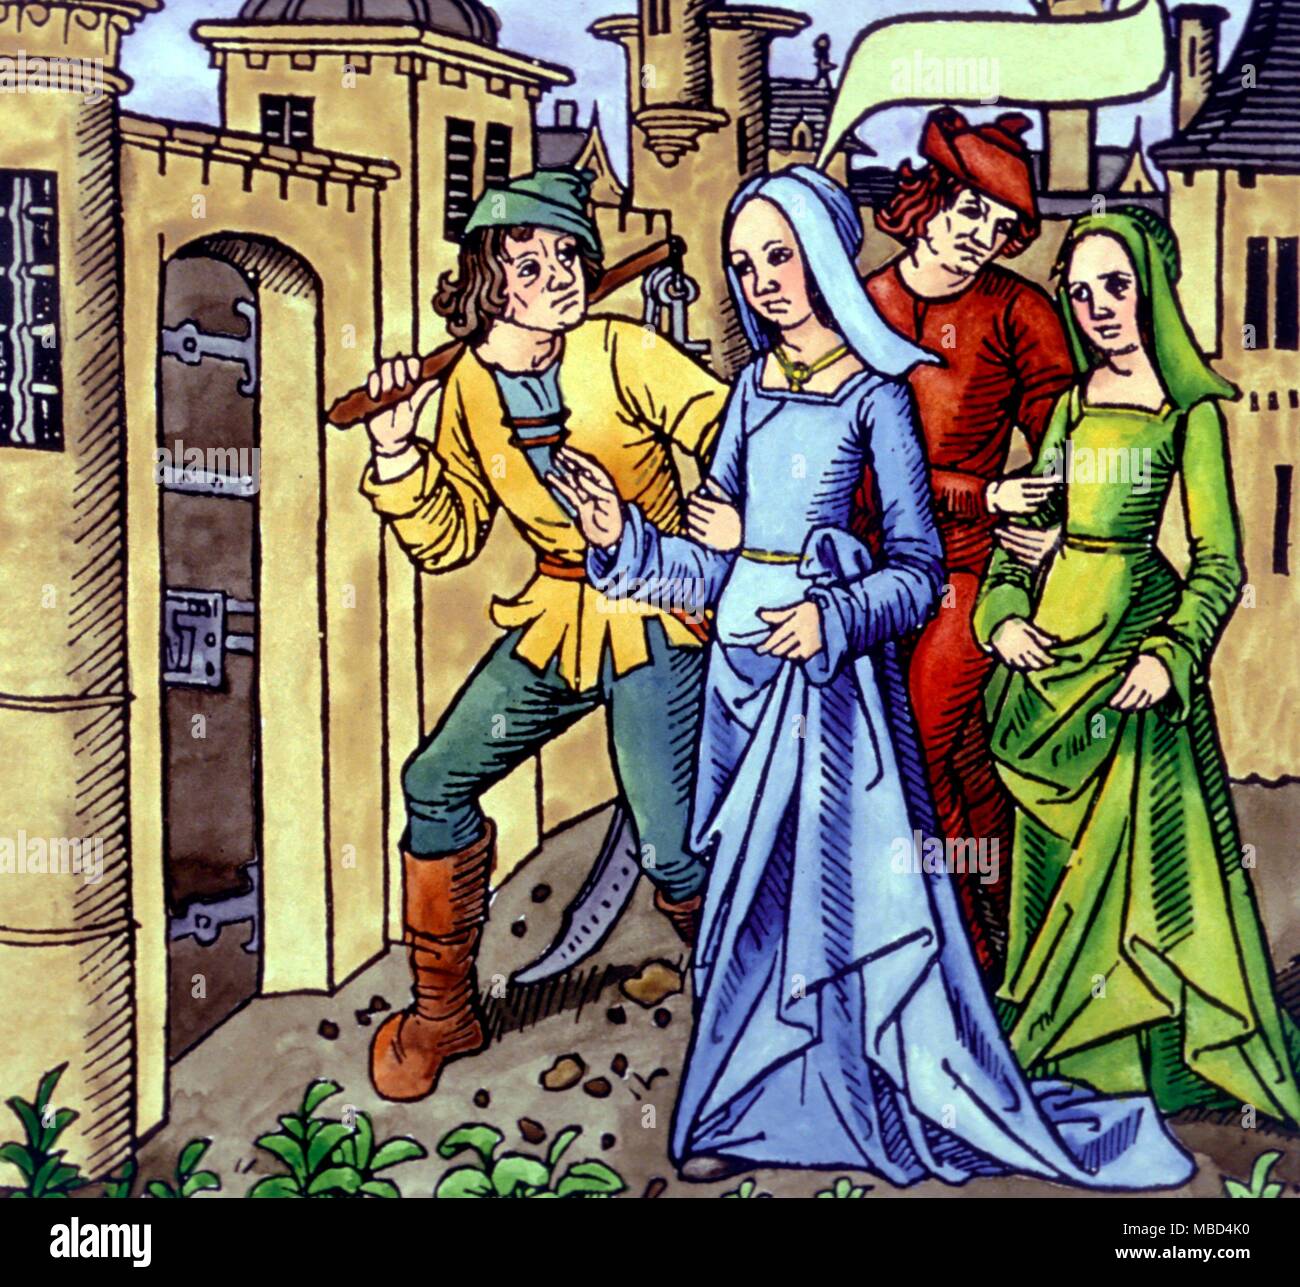 Joan of Arc captured and led to prison. Here she is dressed as a maiden, though she normally dressed as a man. Woodcut of circa 1500. - Stock Photo